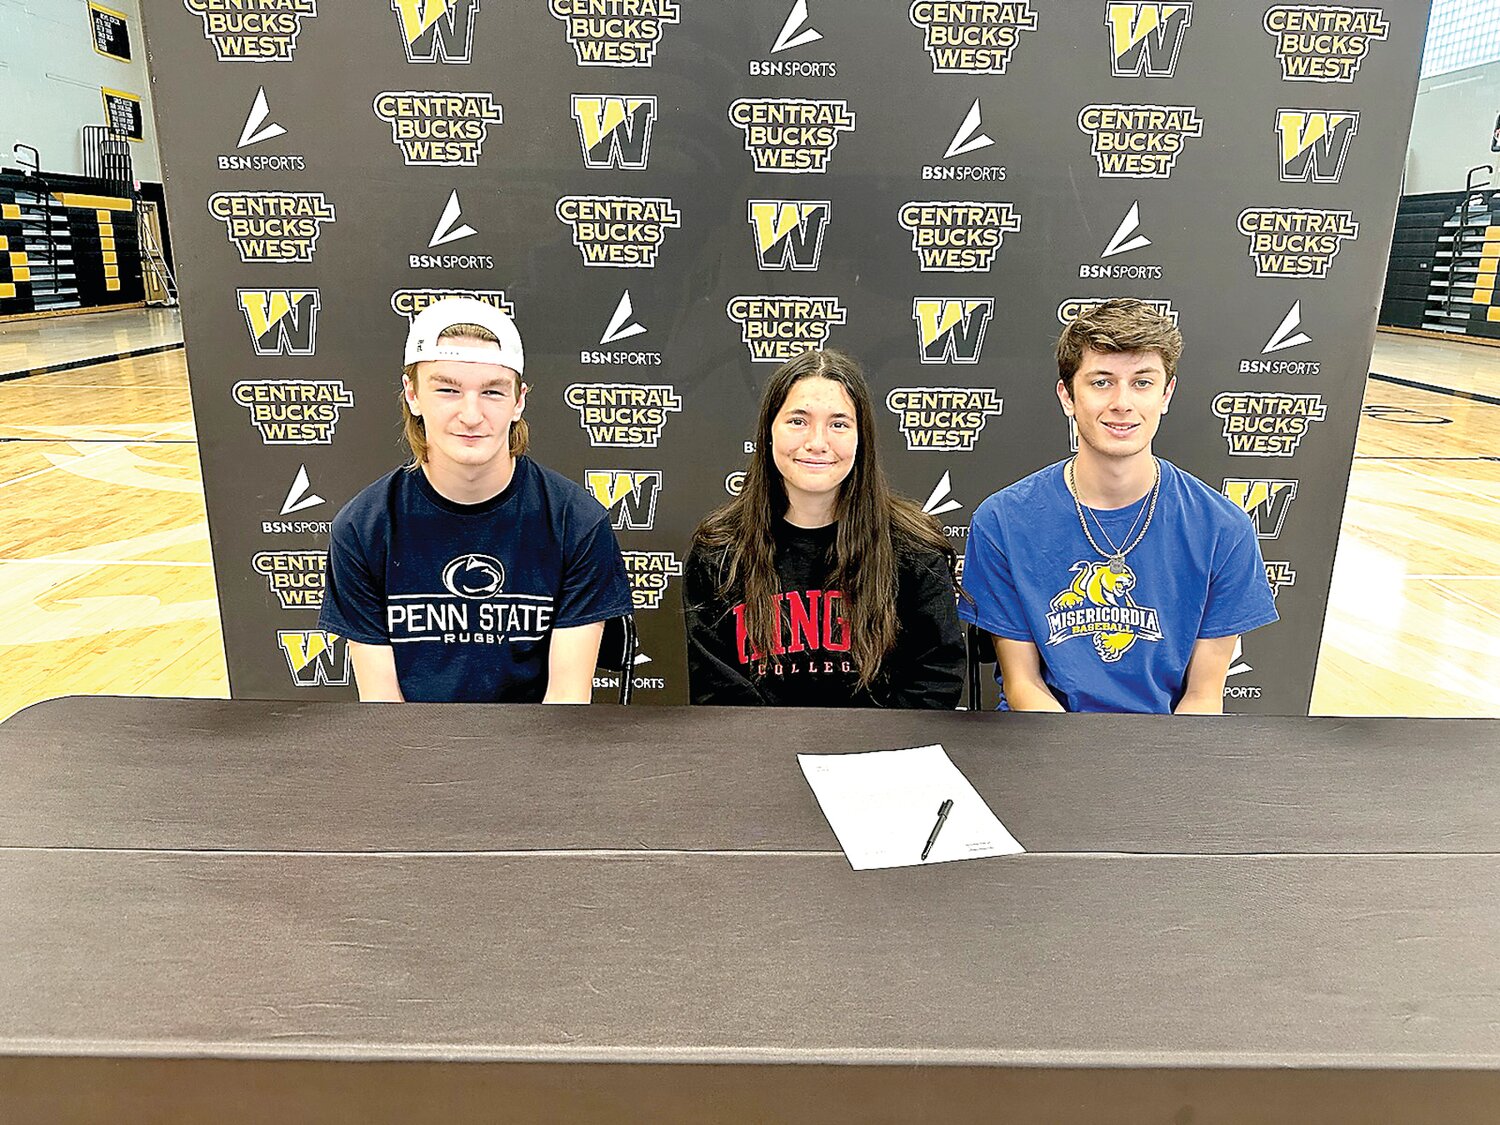 Central Bucks West recently recognized seniors, from left, Andrew Gilroy, Ava Mattes and Carter Benson for their commitment to compete in collegiate sports.